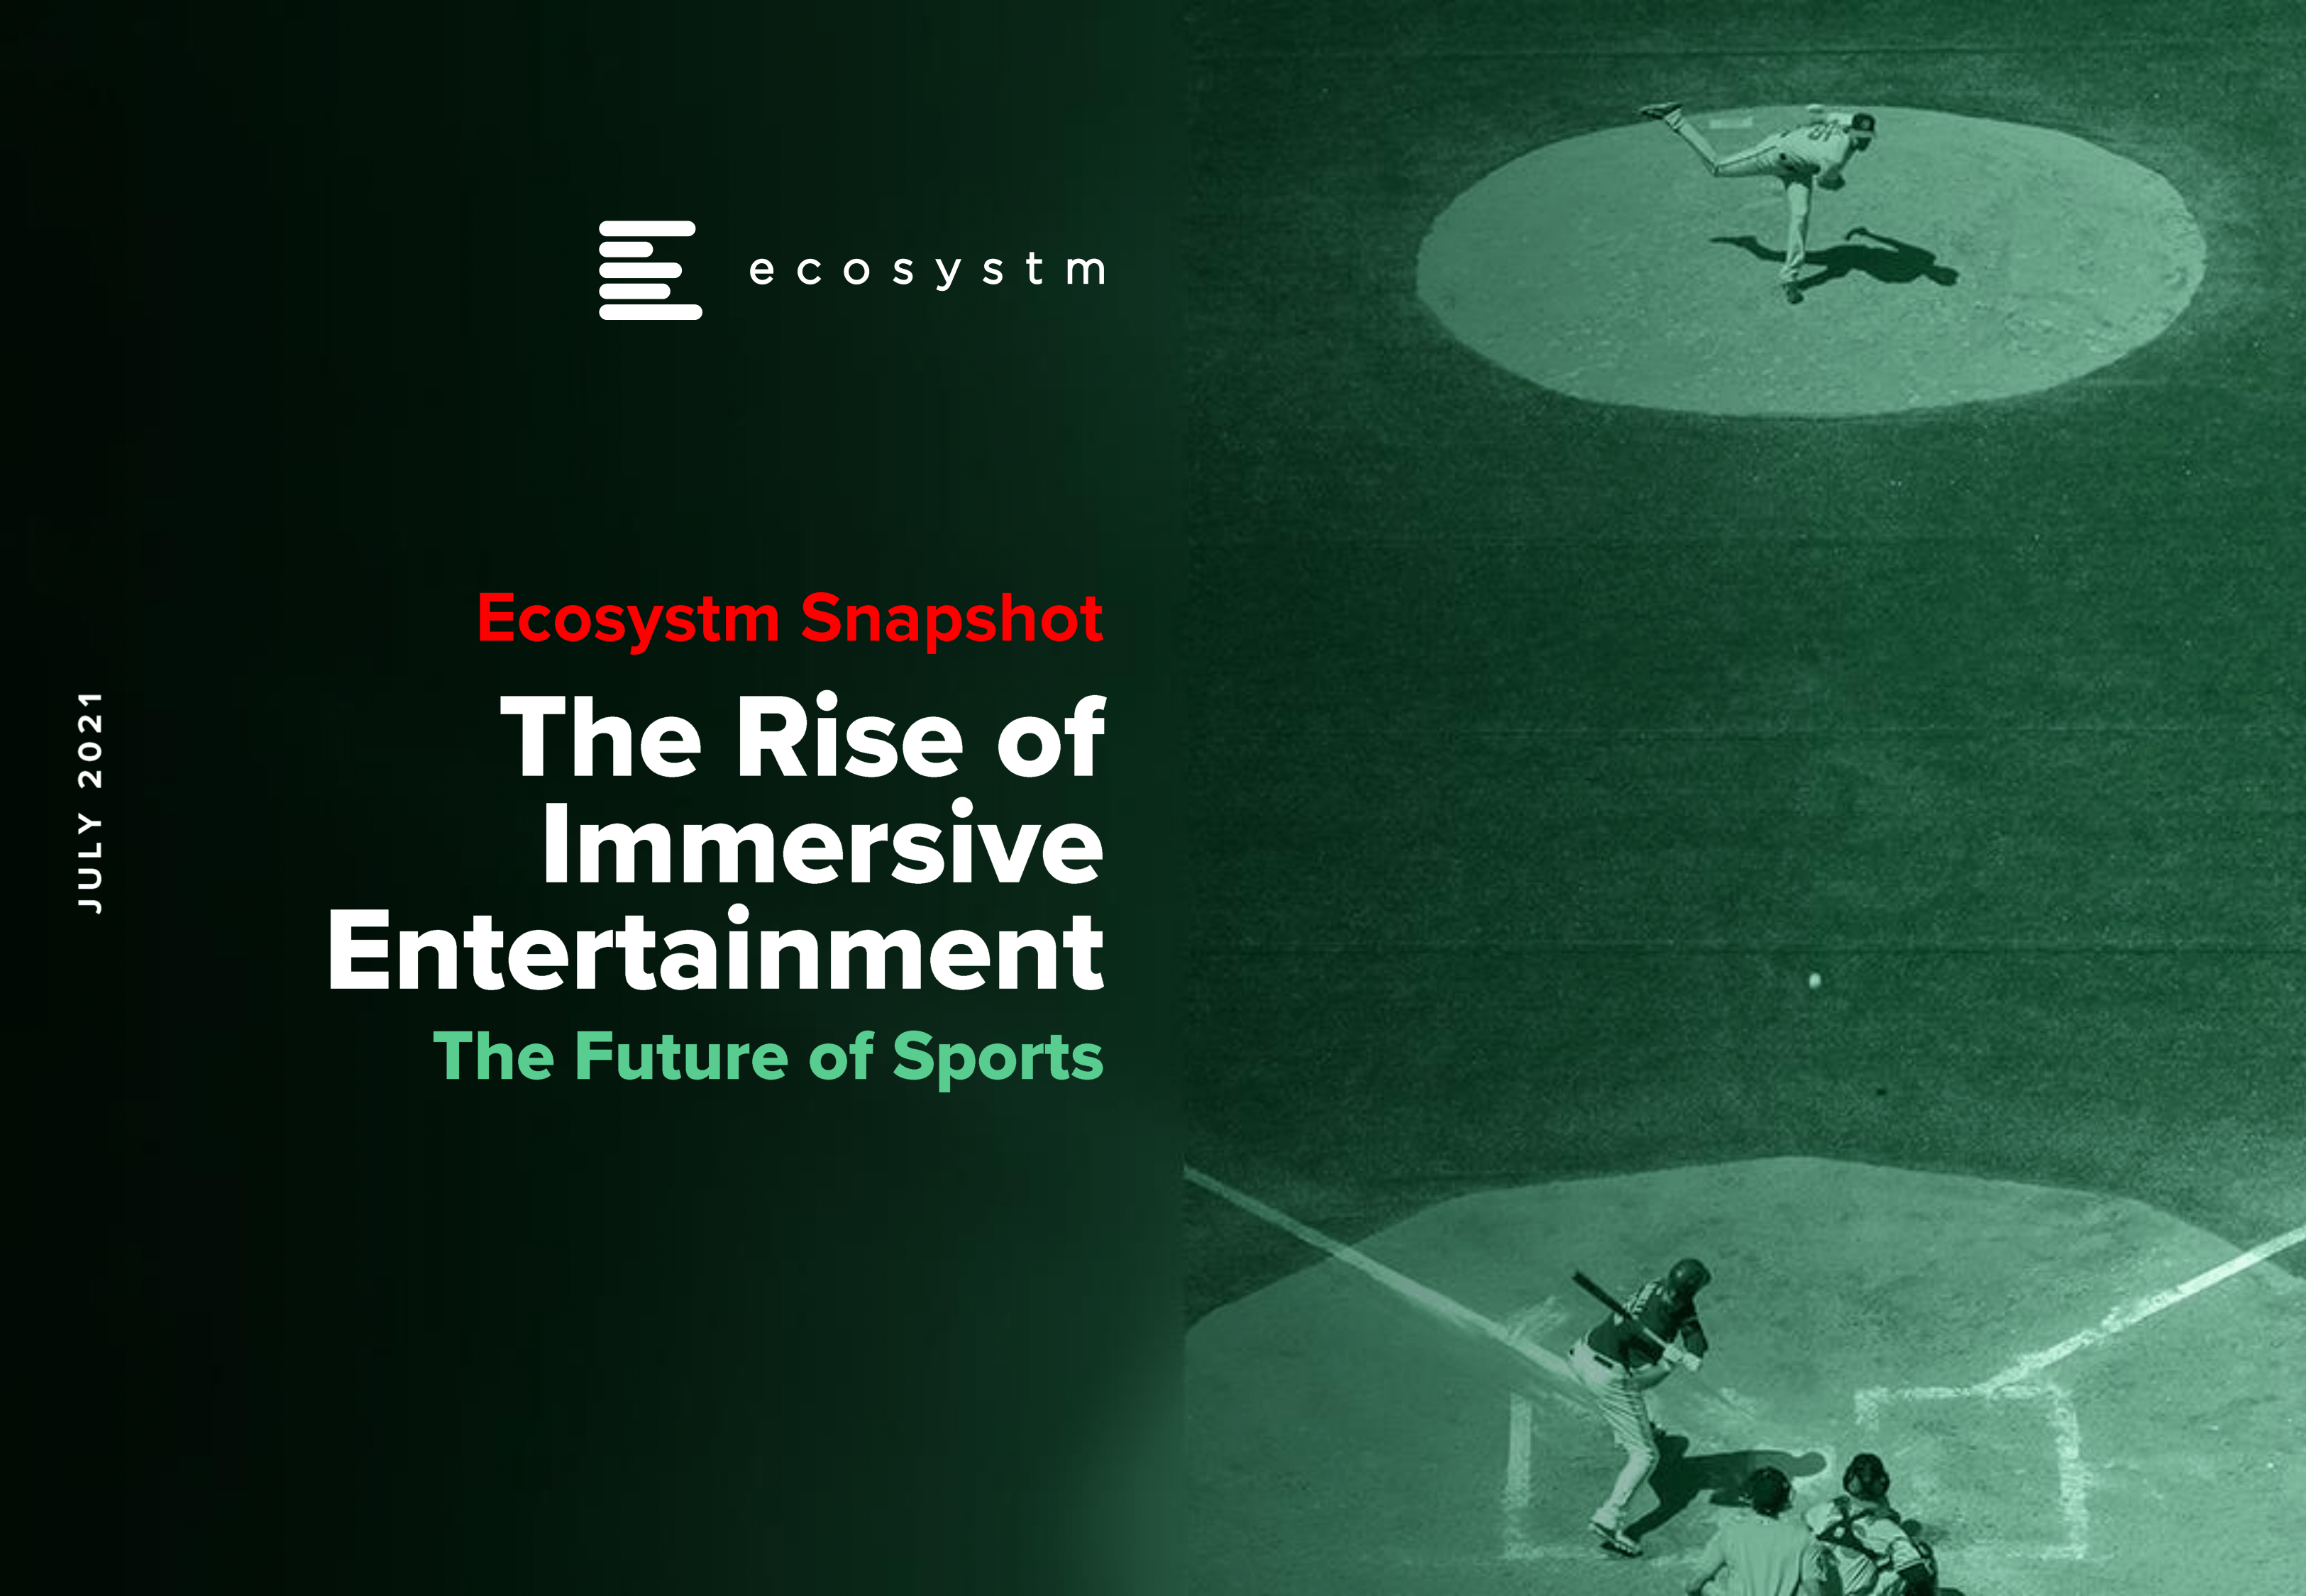 Immersive-Entertainment-The-Future-of-Sports-1